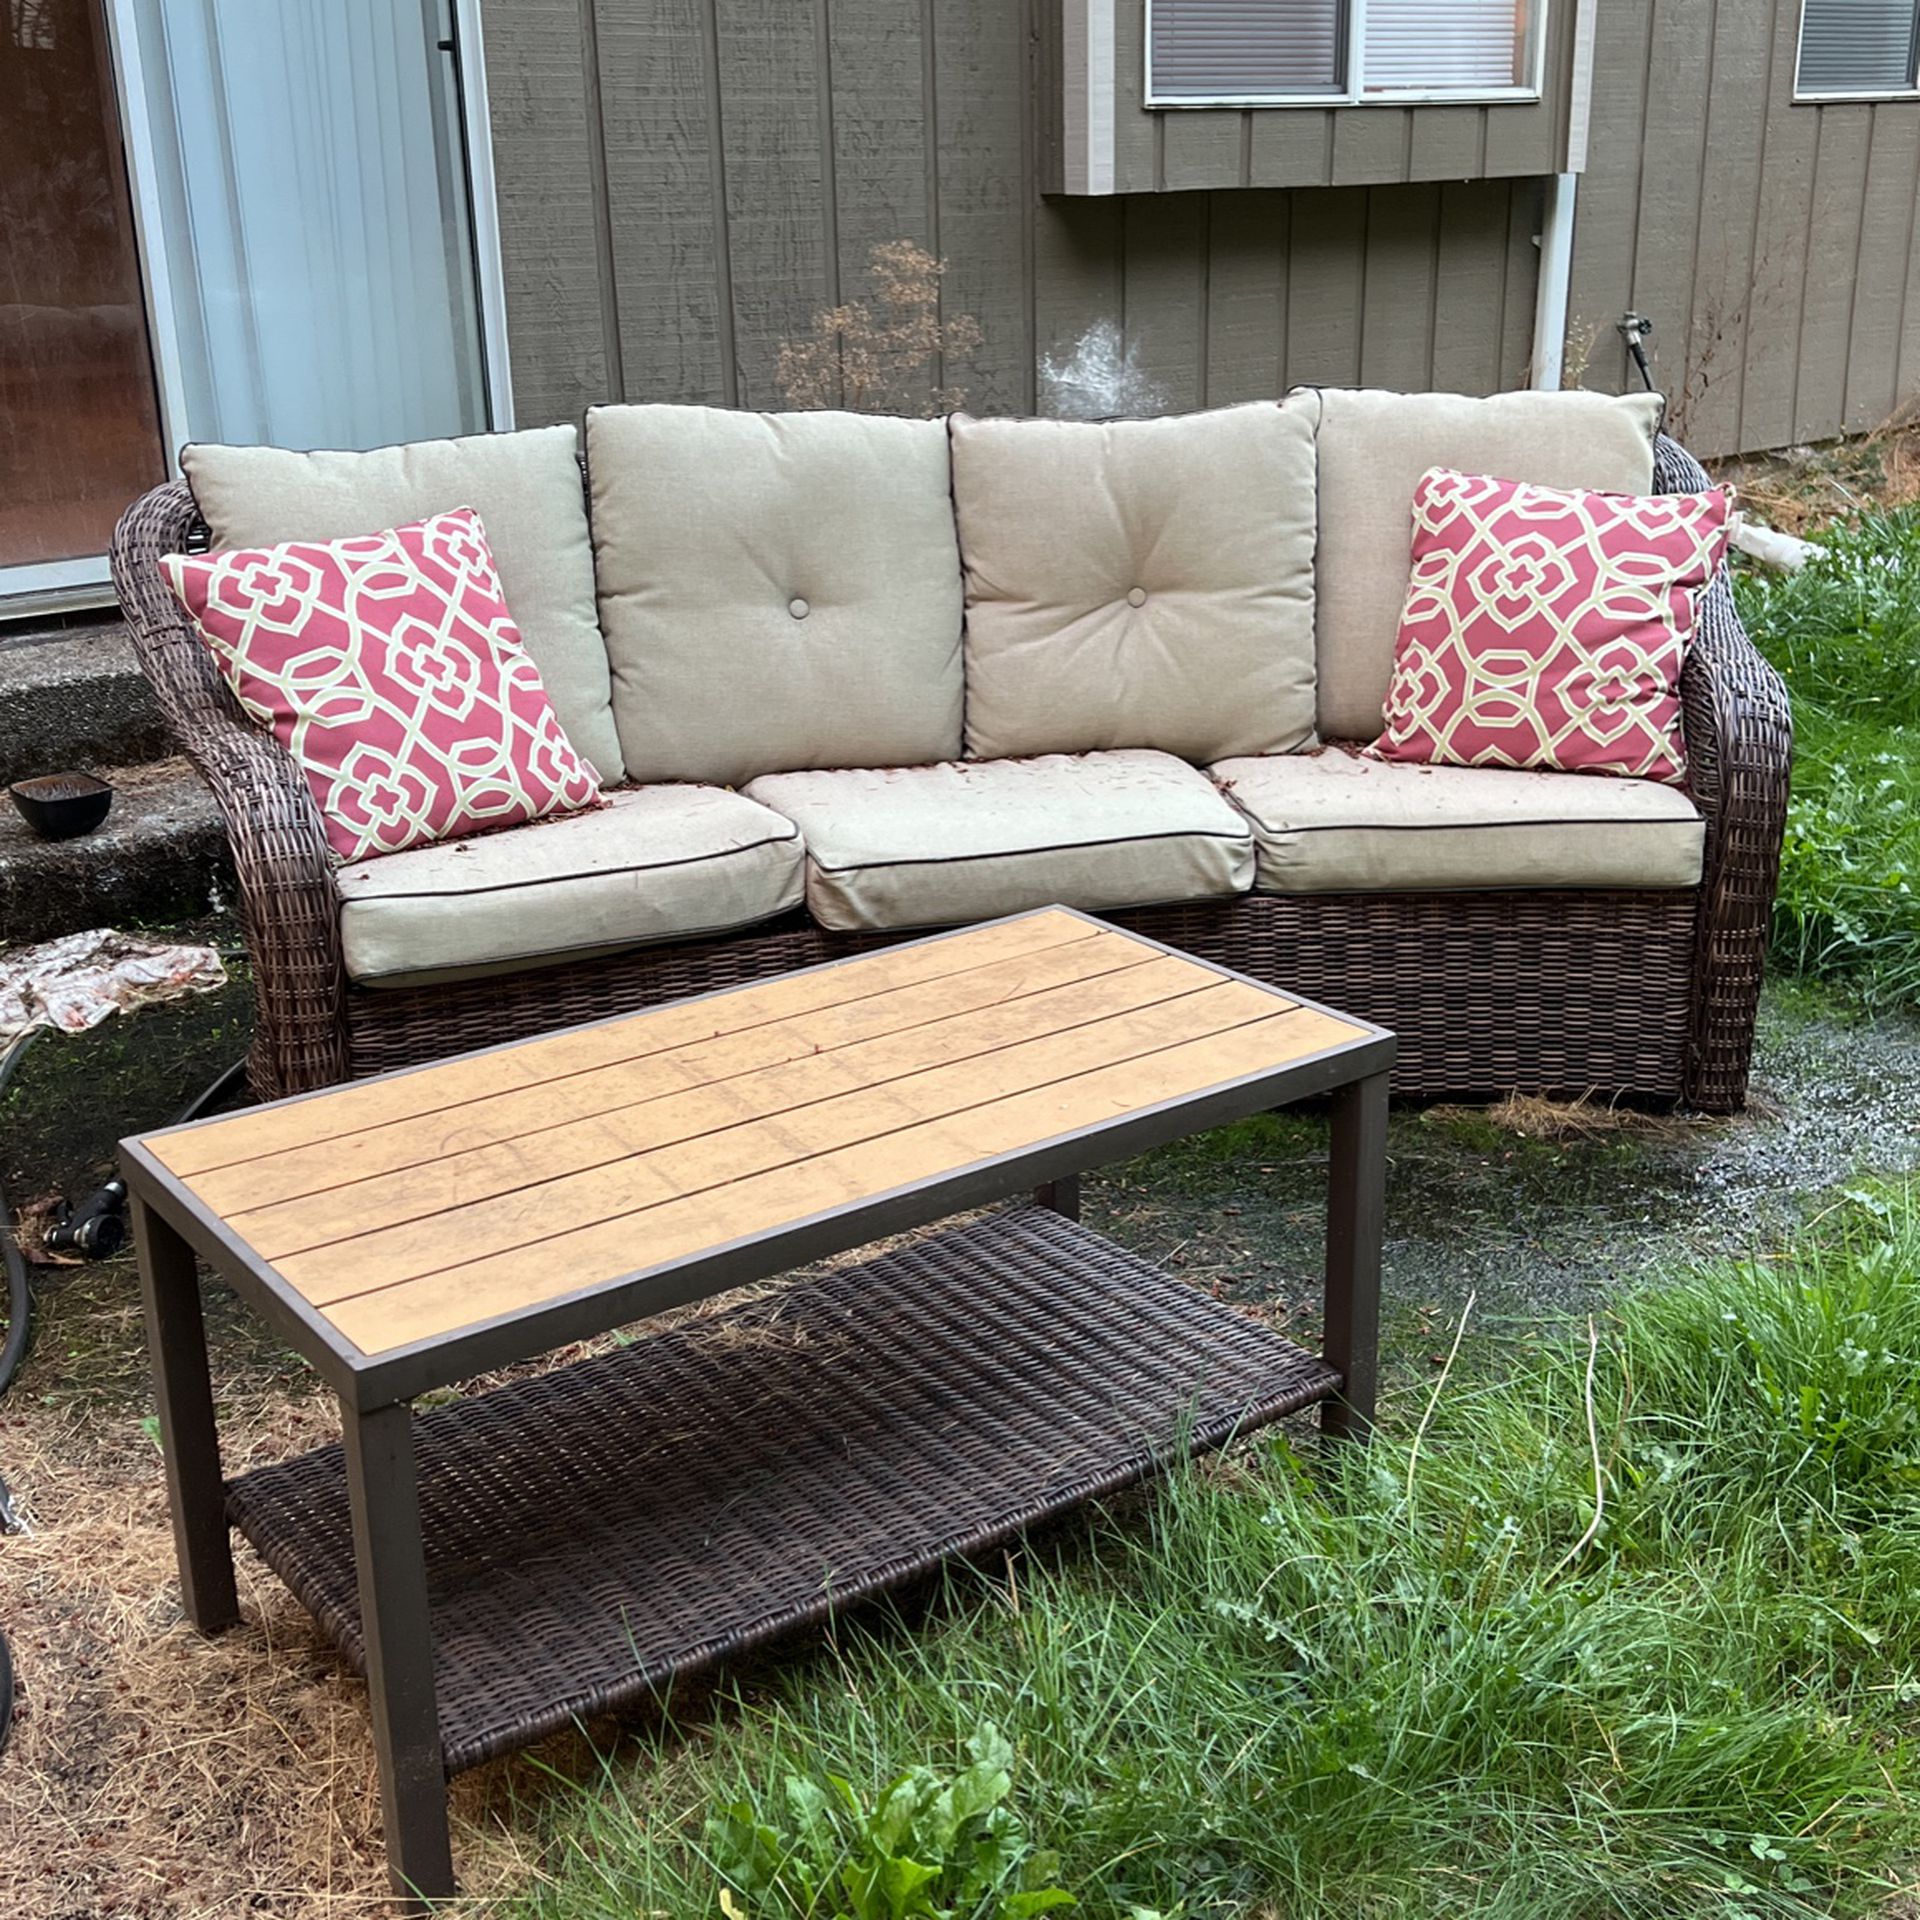 Outside Couch And Table